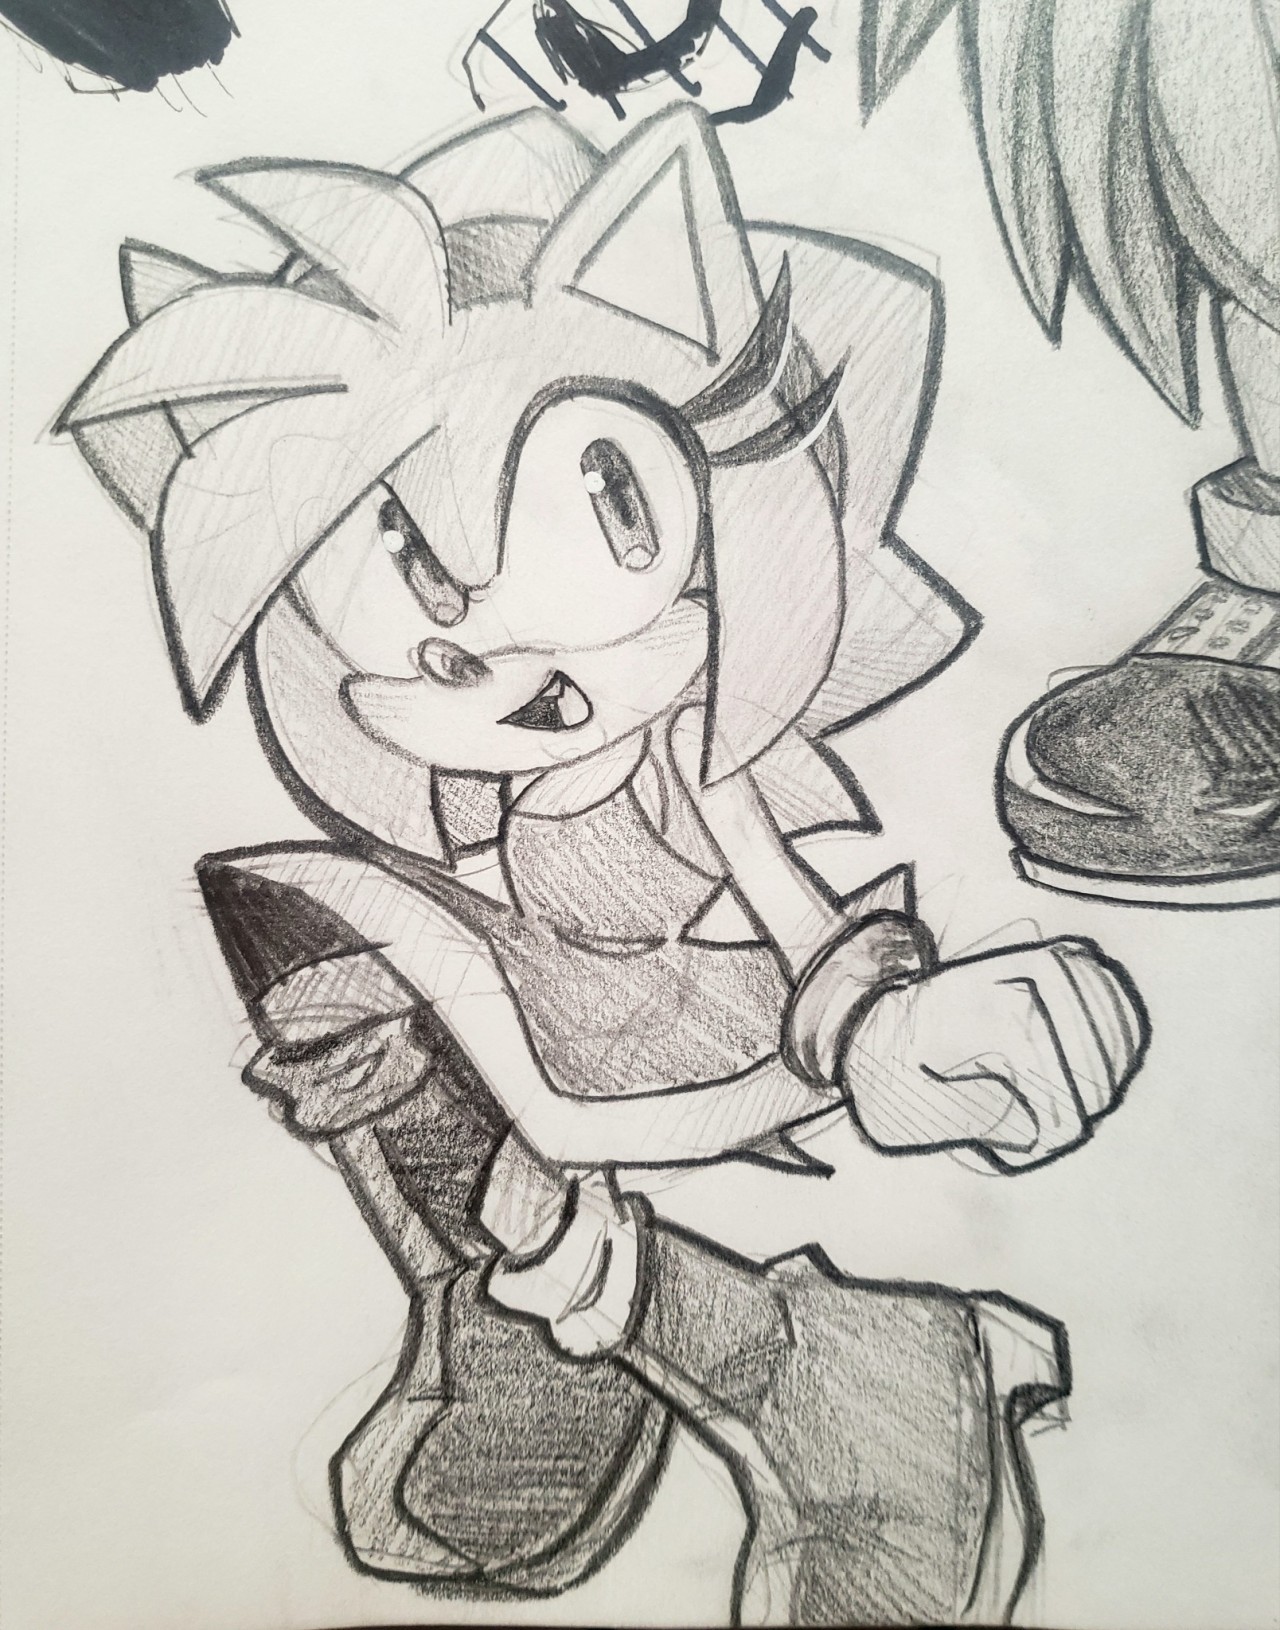 Buh — Sketches! Wanted to draw Amy and Shadow hangin out